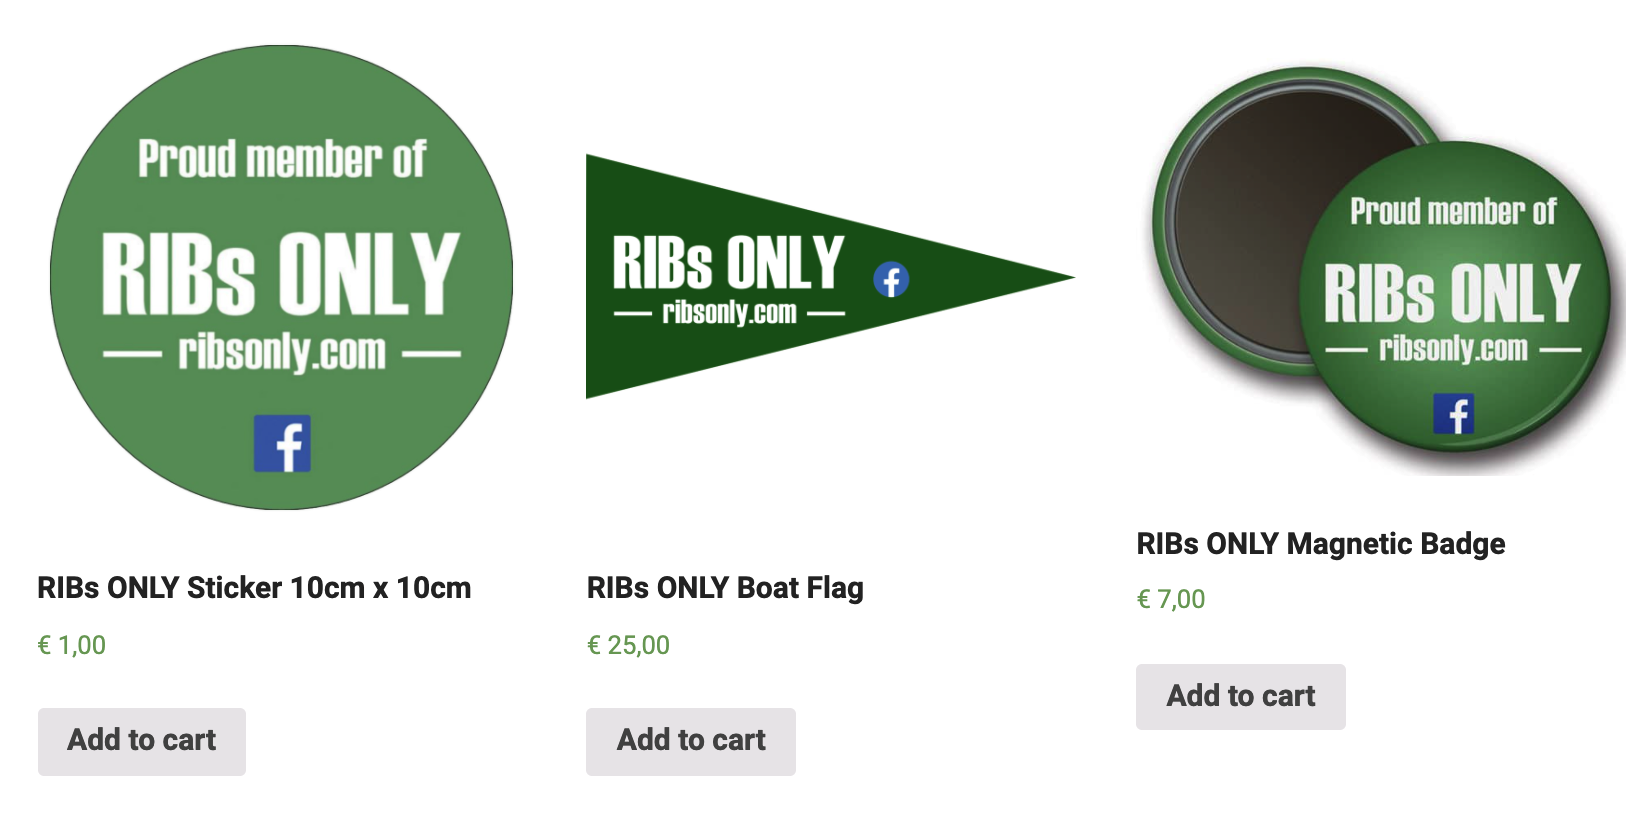 Check it: New RIBs ONLY Goodies in our Shop @ RIBs ONLY - Home of the Rigid Inflatable Boat